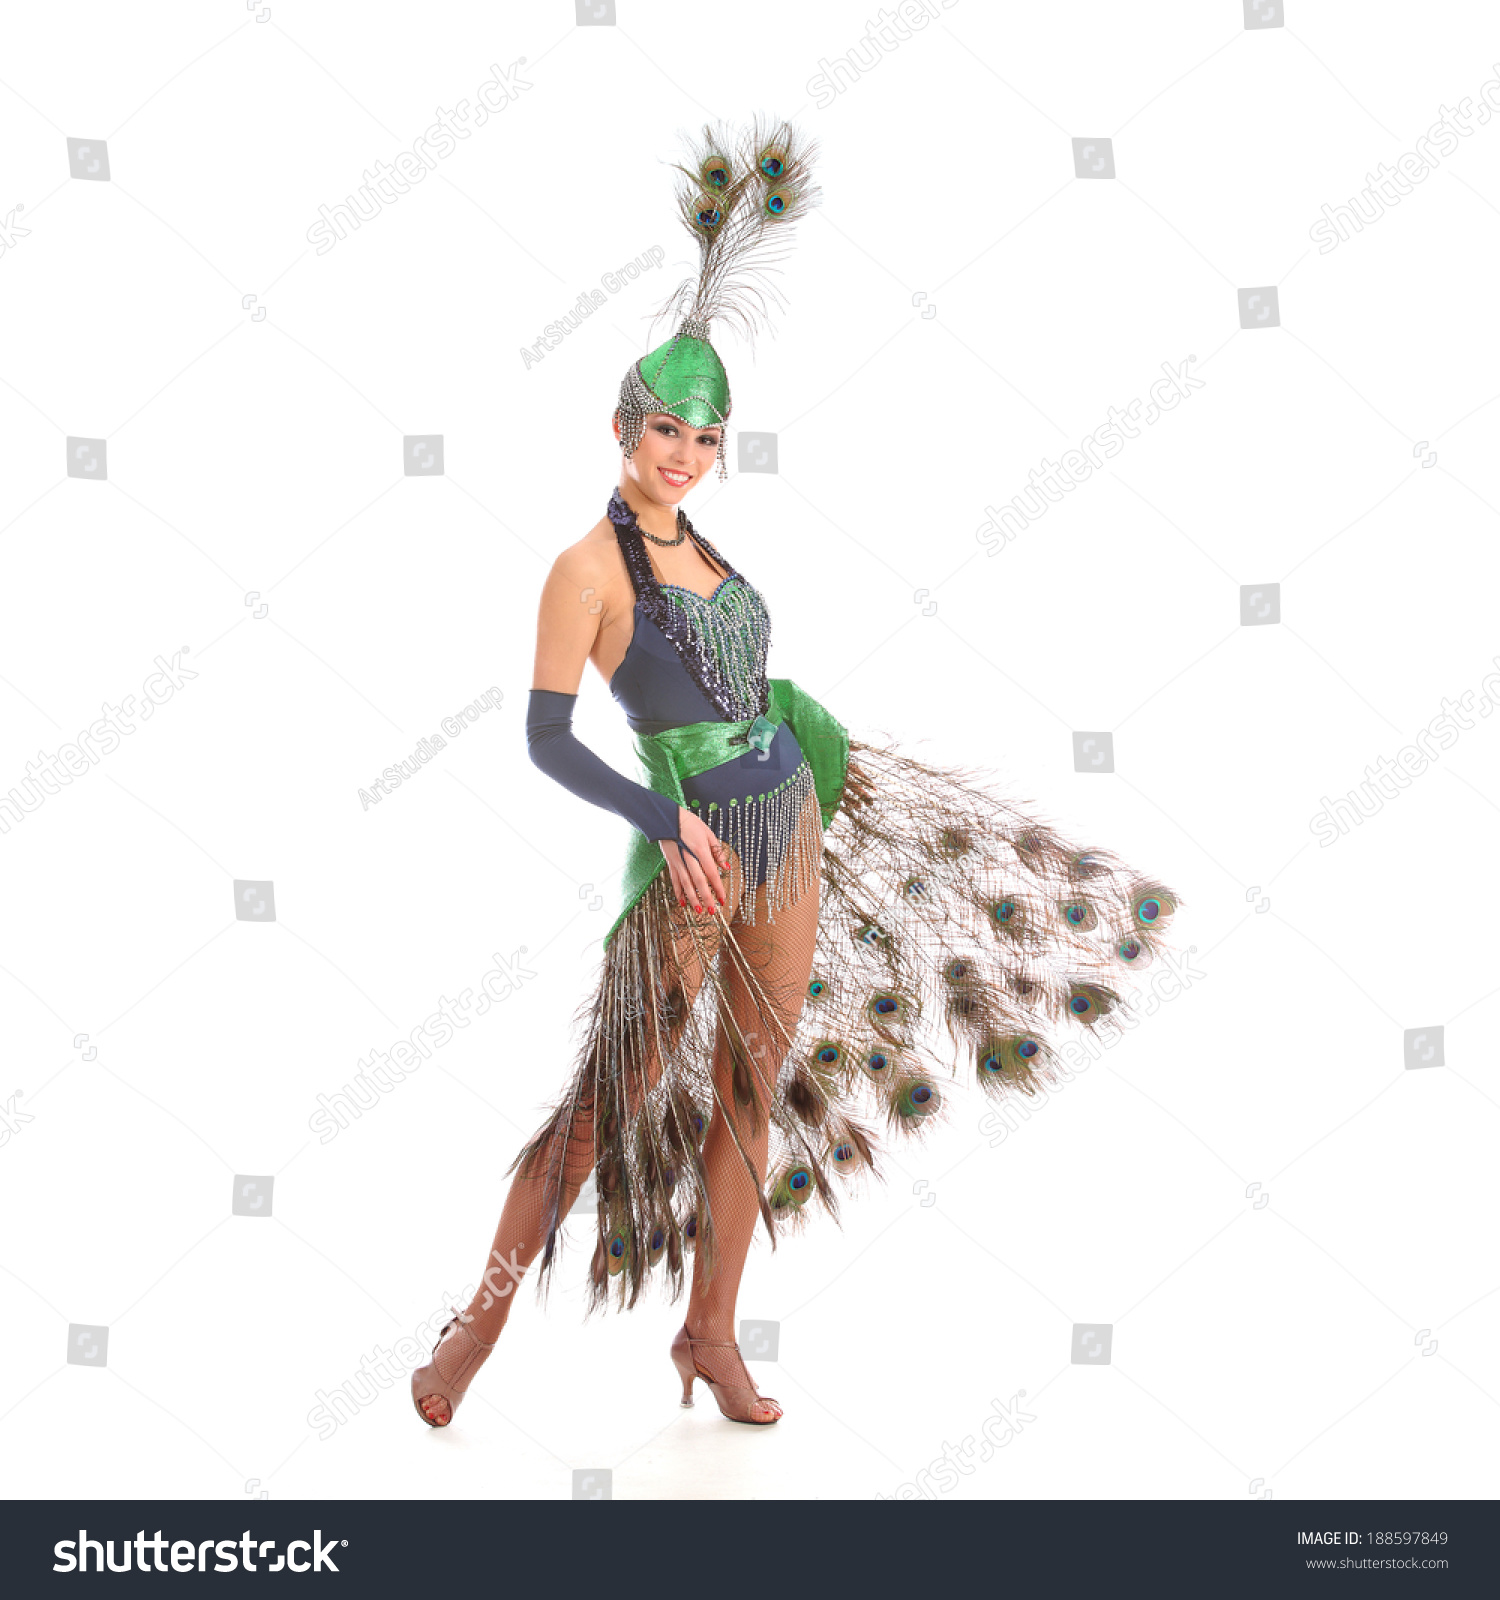 Burlesque dancer with peacock feathers and green dress  #188597849